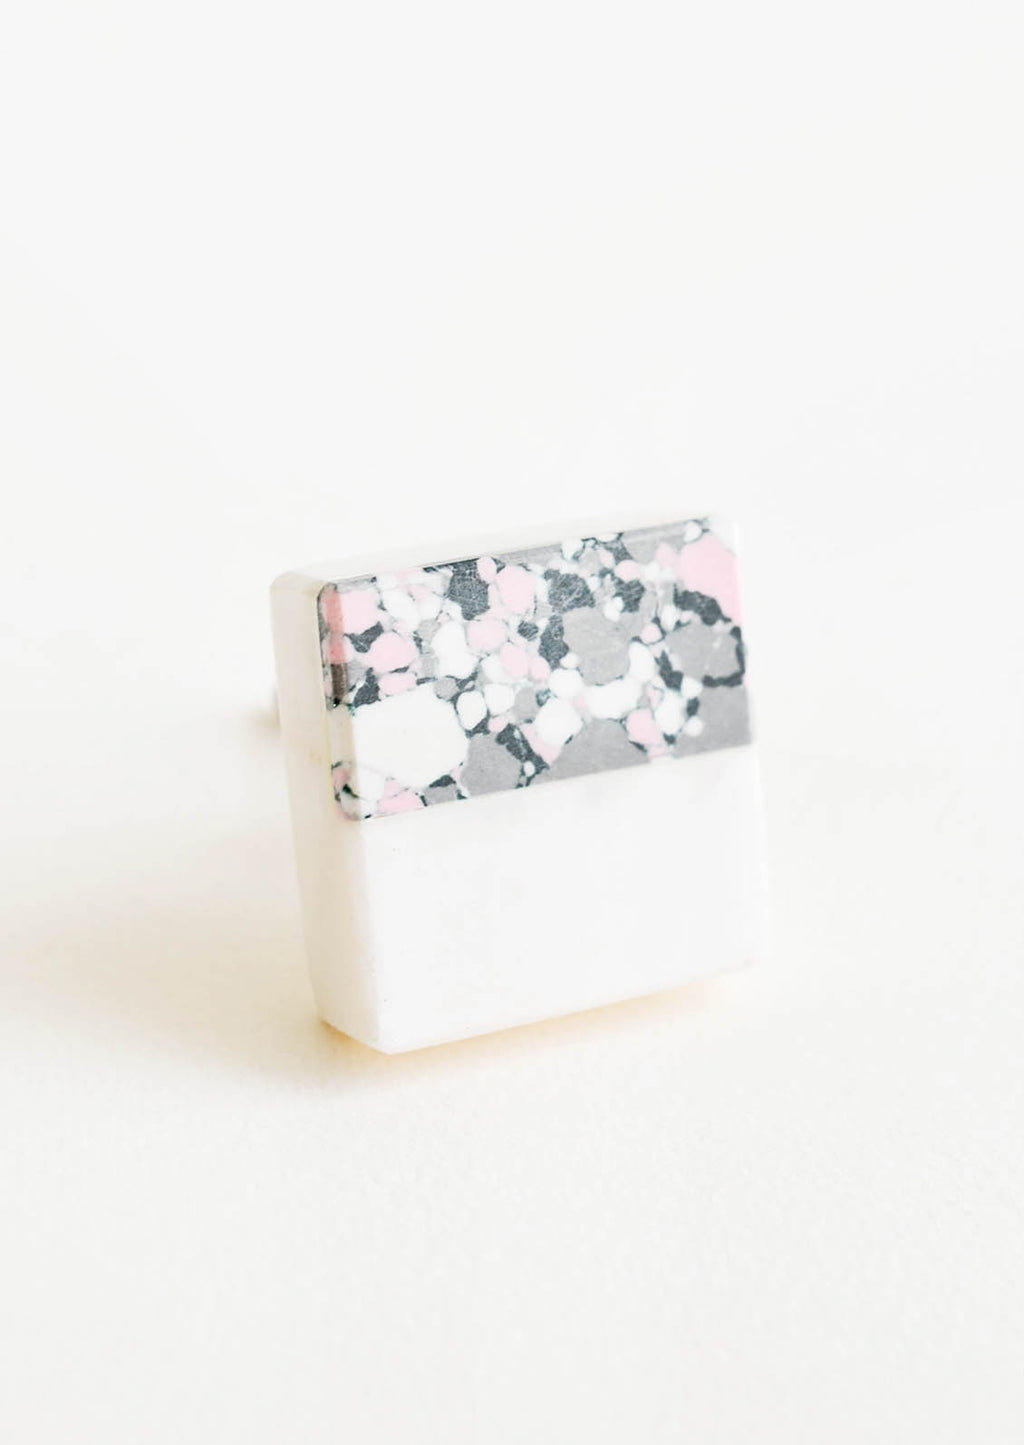 1: Square cabinet knob with white marble bottom half and splattered paint top half